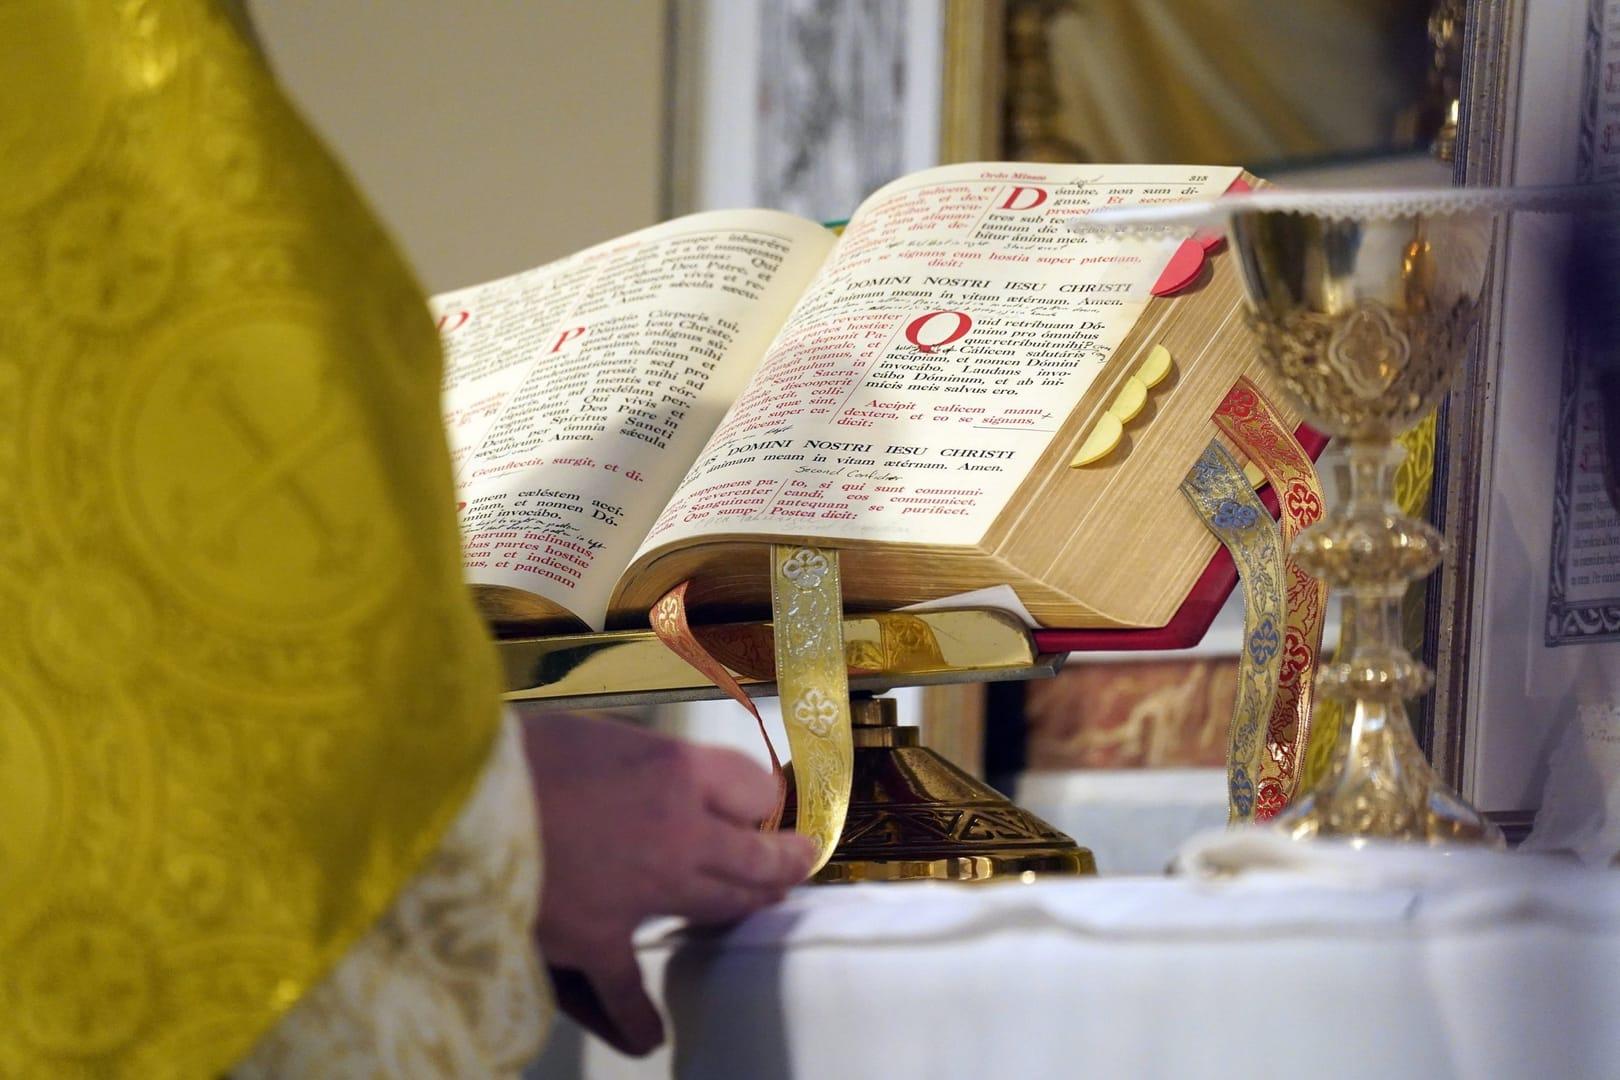 Latin Mass held in New Orleans with support of archbishop